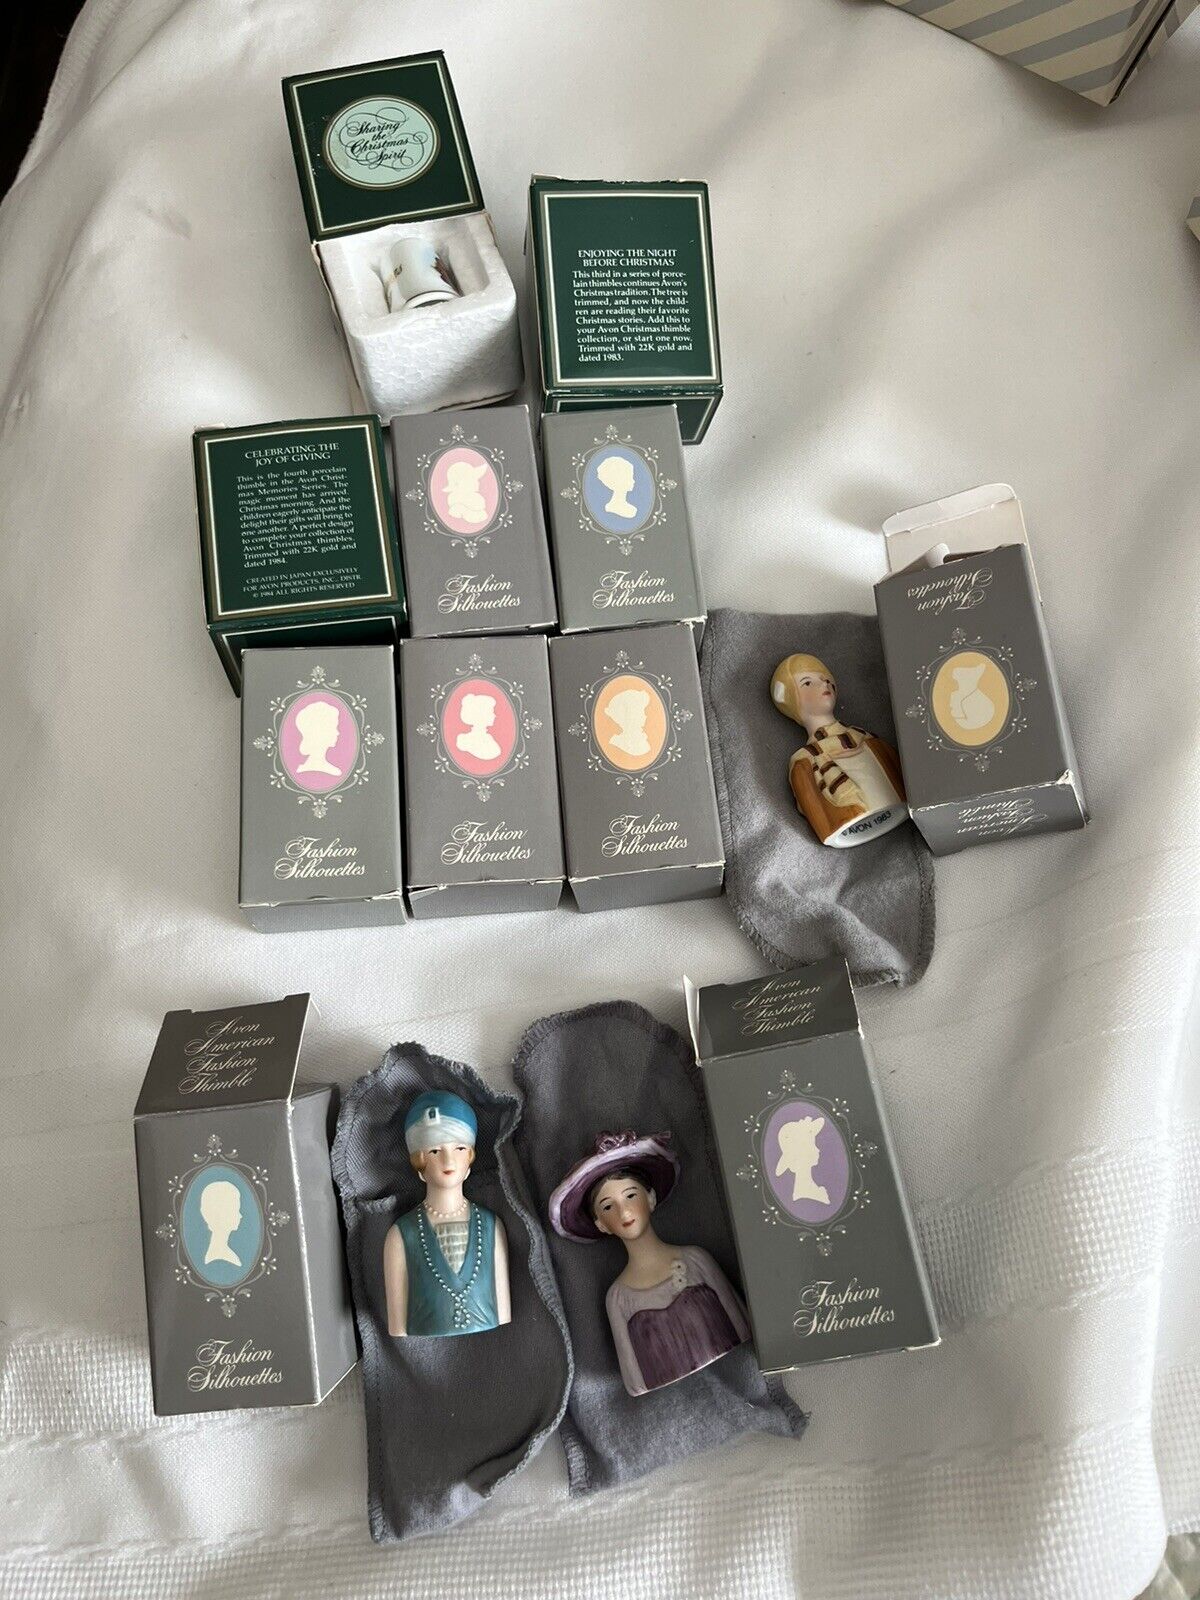 11 Avon Thimbles Fashion Silhouettes And Christmas in Boxes